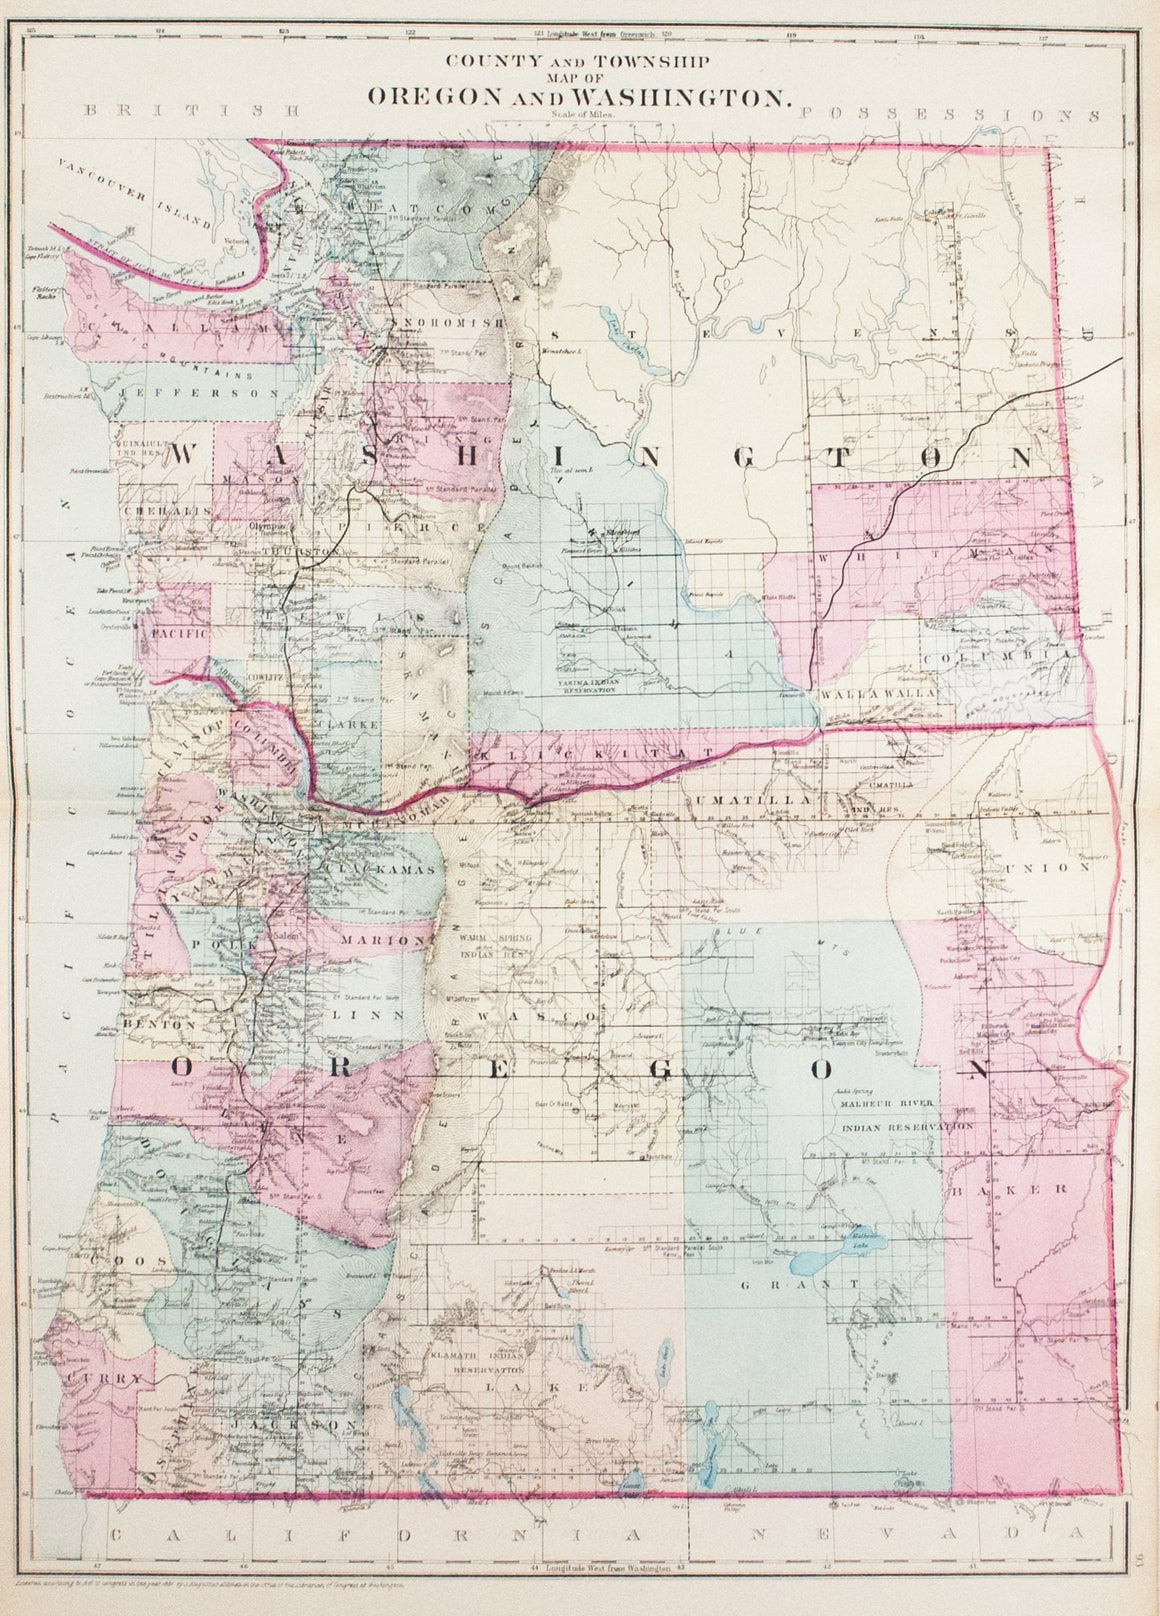 1881 County and Township Map of Oregon and Washington - S Mitchell Jr